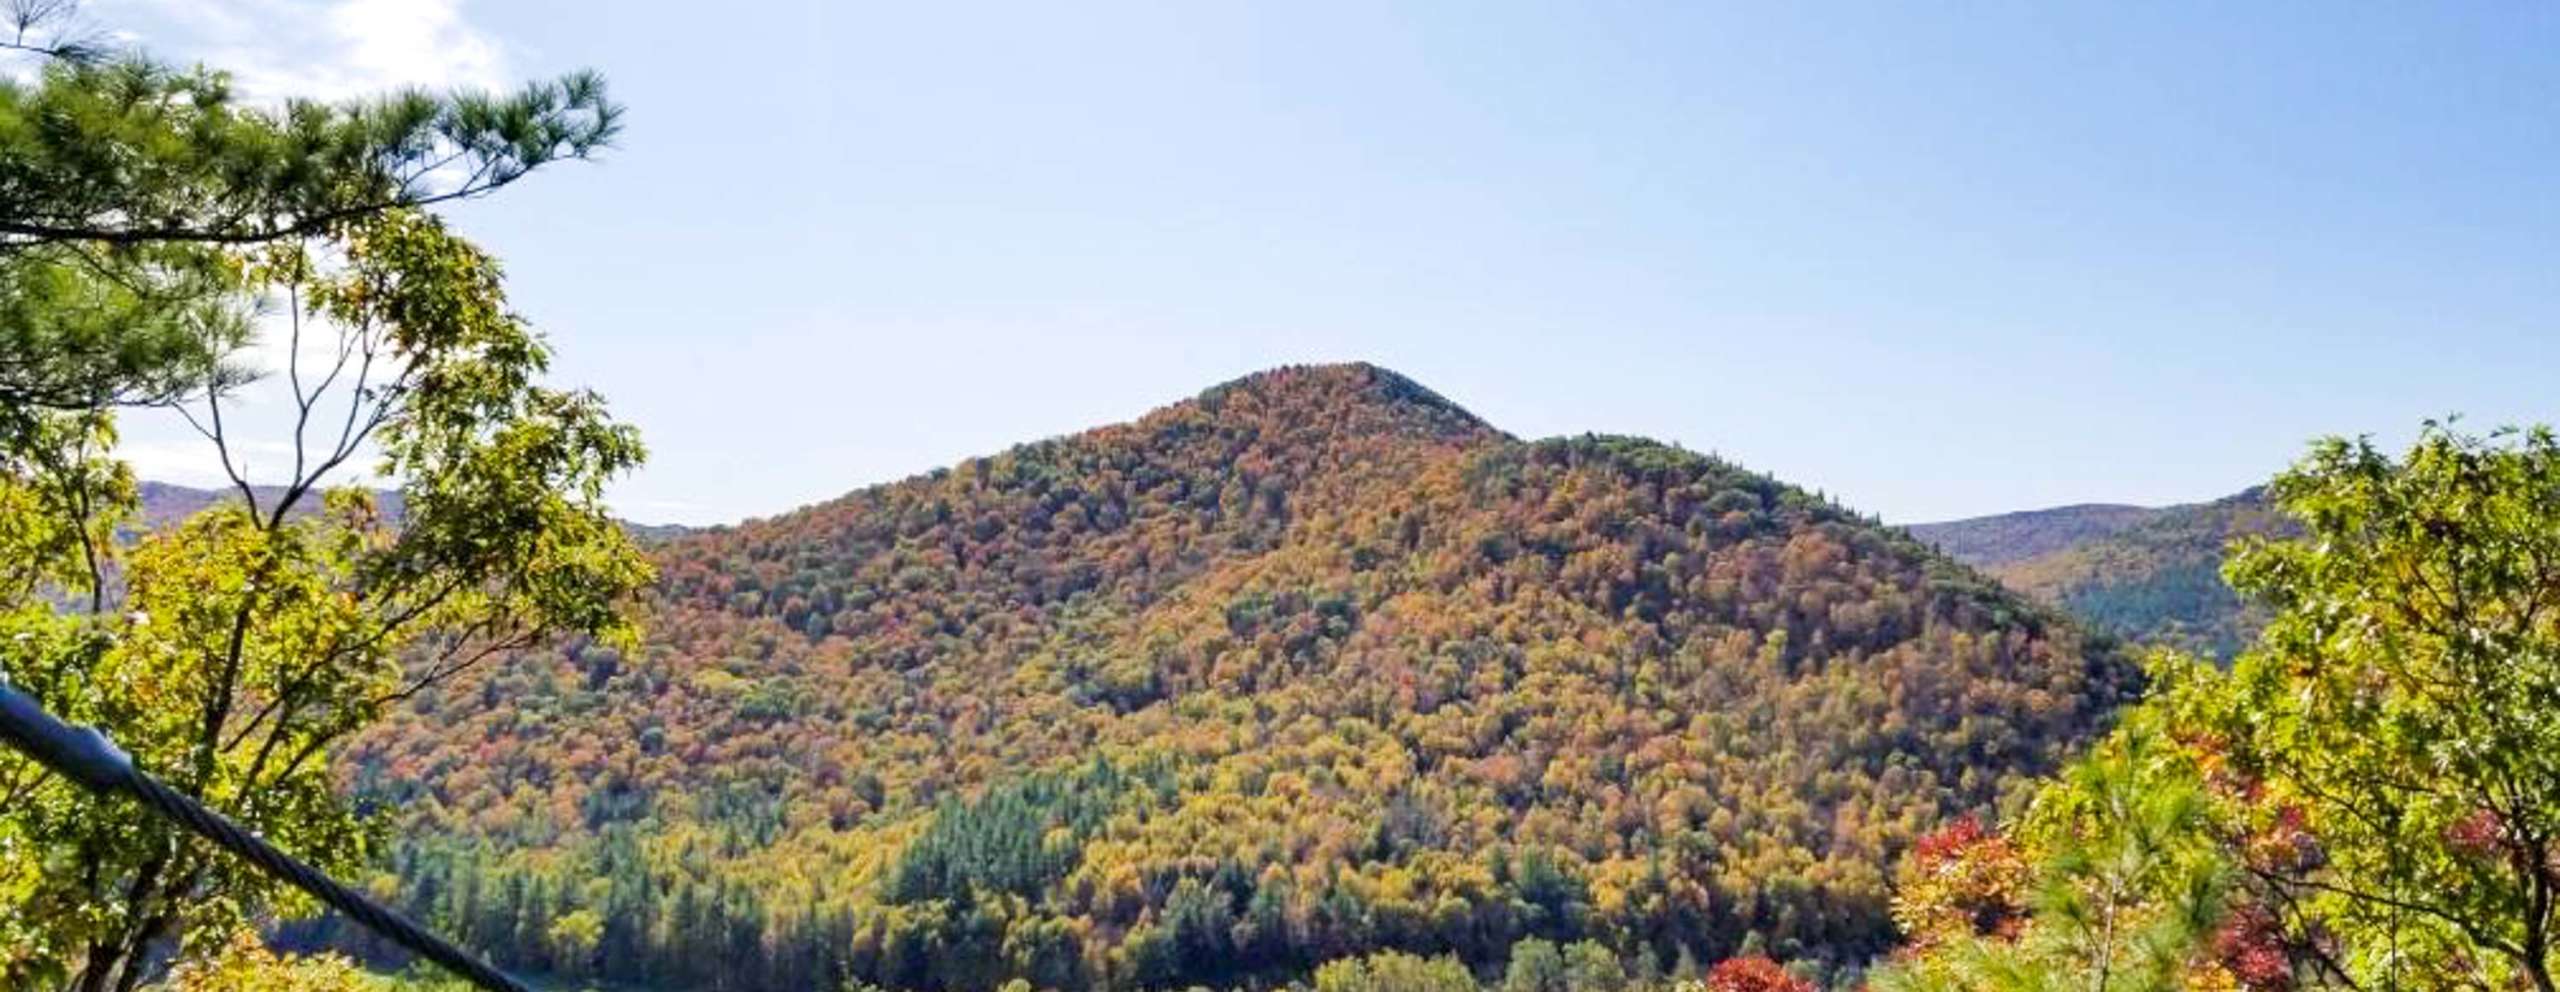 Mountains covered in trees with leaves turning colors